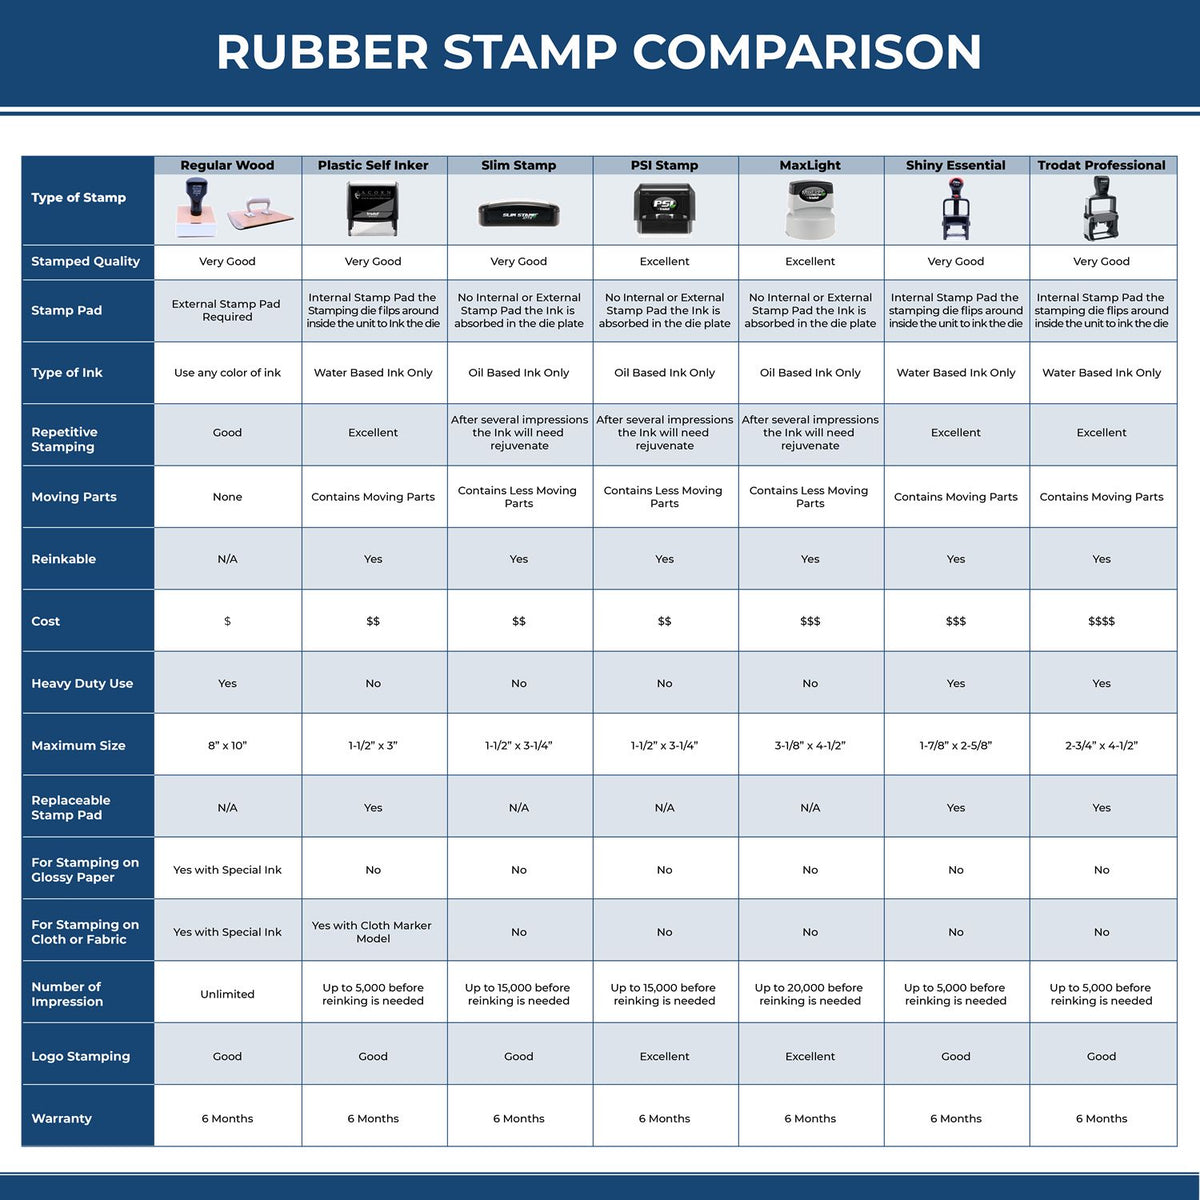 Large Pre-Inked Please Pay Now No Statements Stamp 4988SLIM Rubber Stamp Comparison